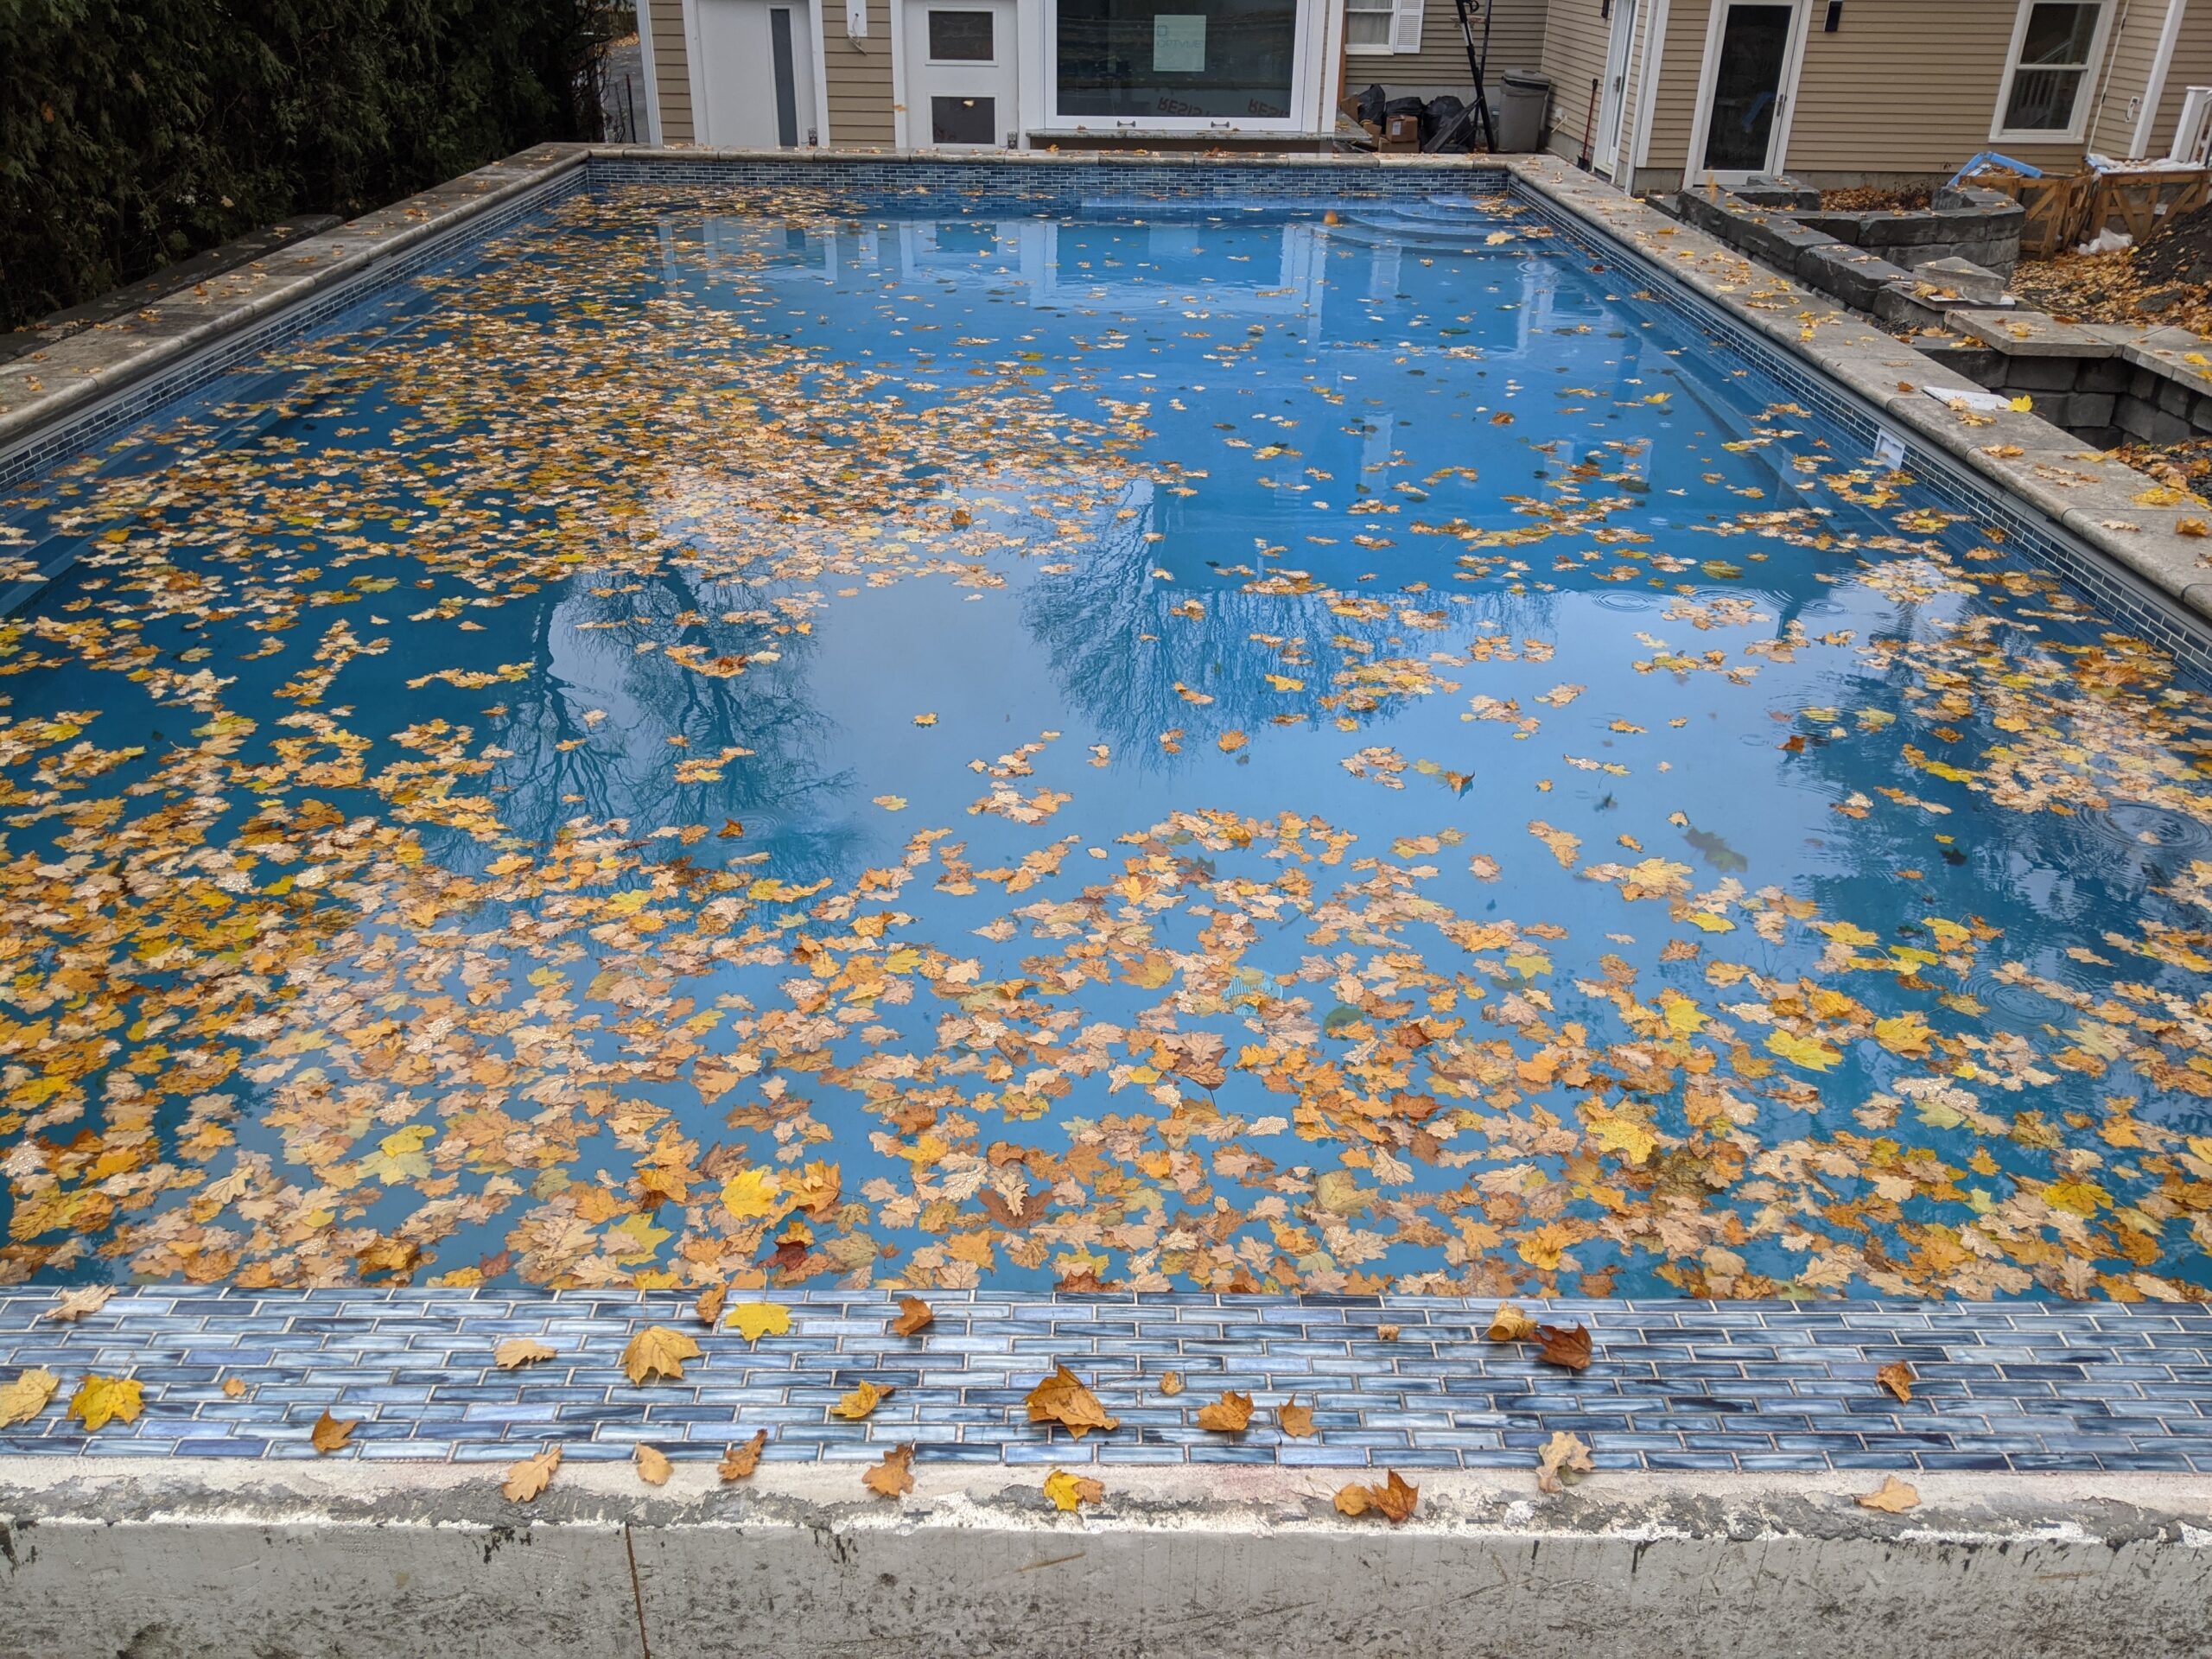 Photo of ICF pool in early autumn with interior of the pool finish with blue waterproof paint and tiles at the top.